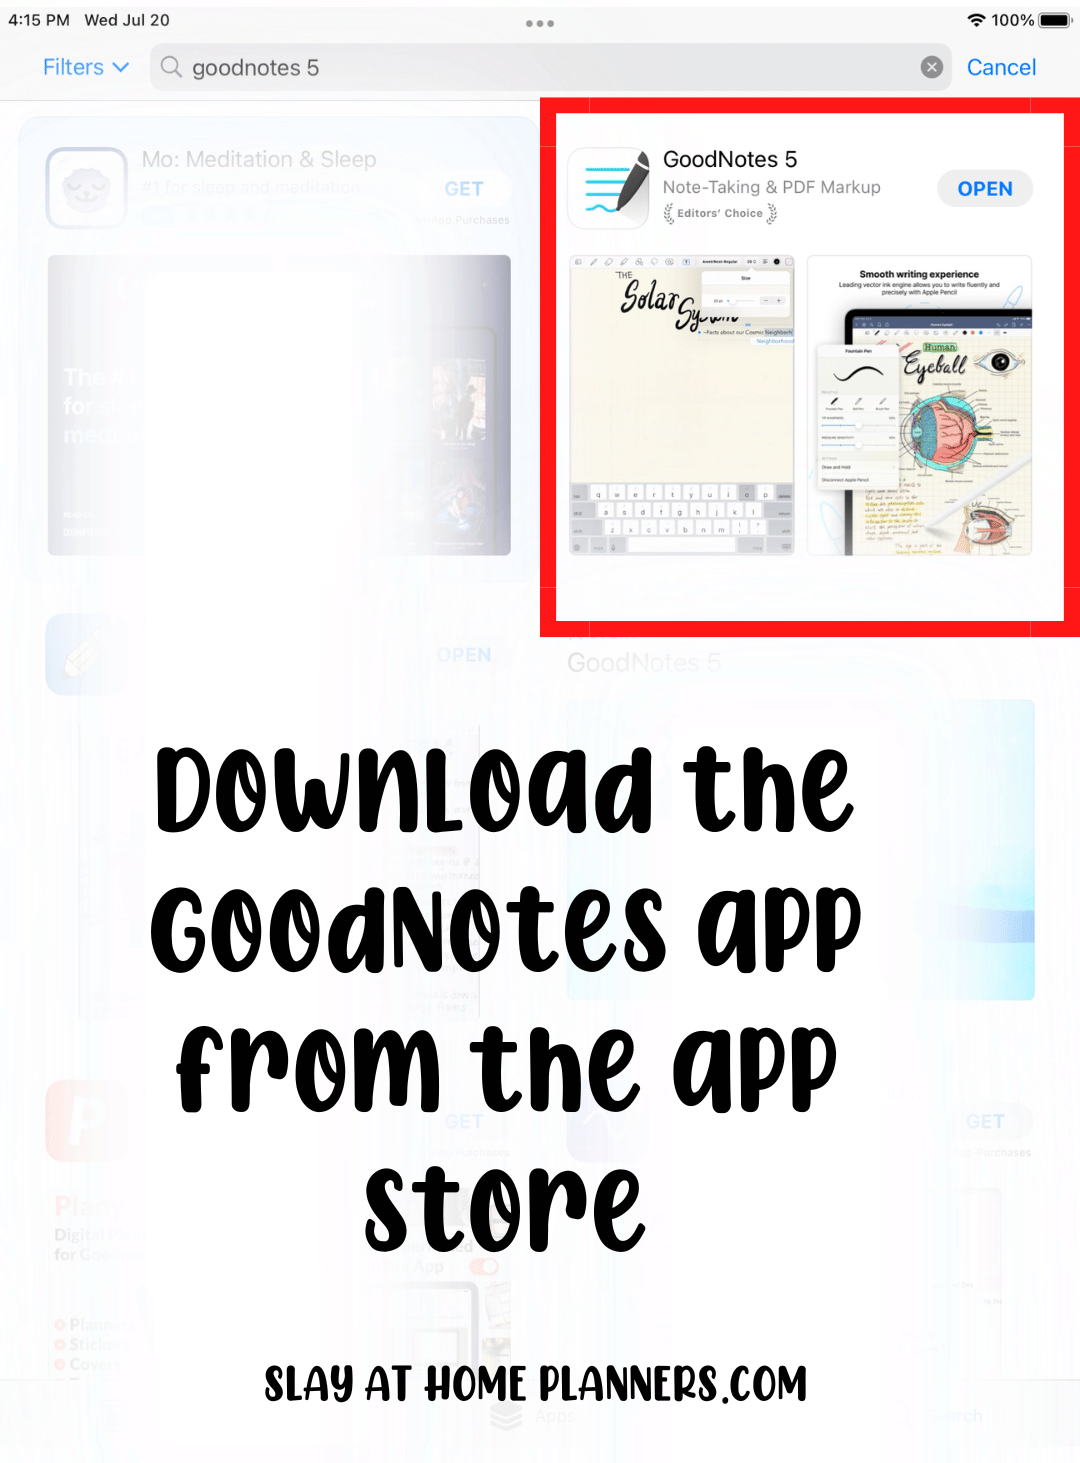 download goodnotes app image